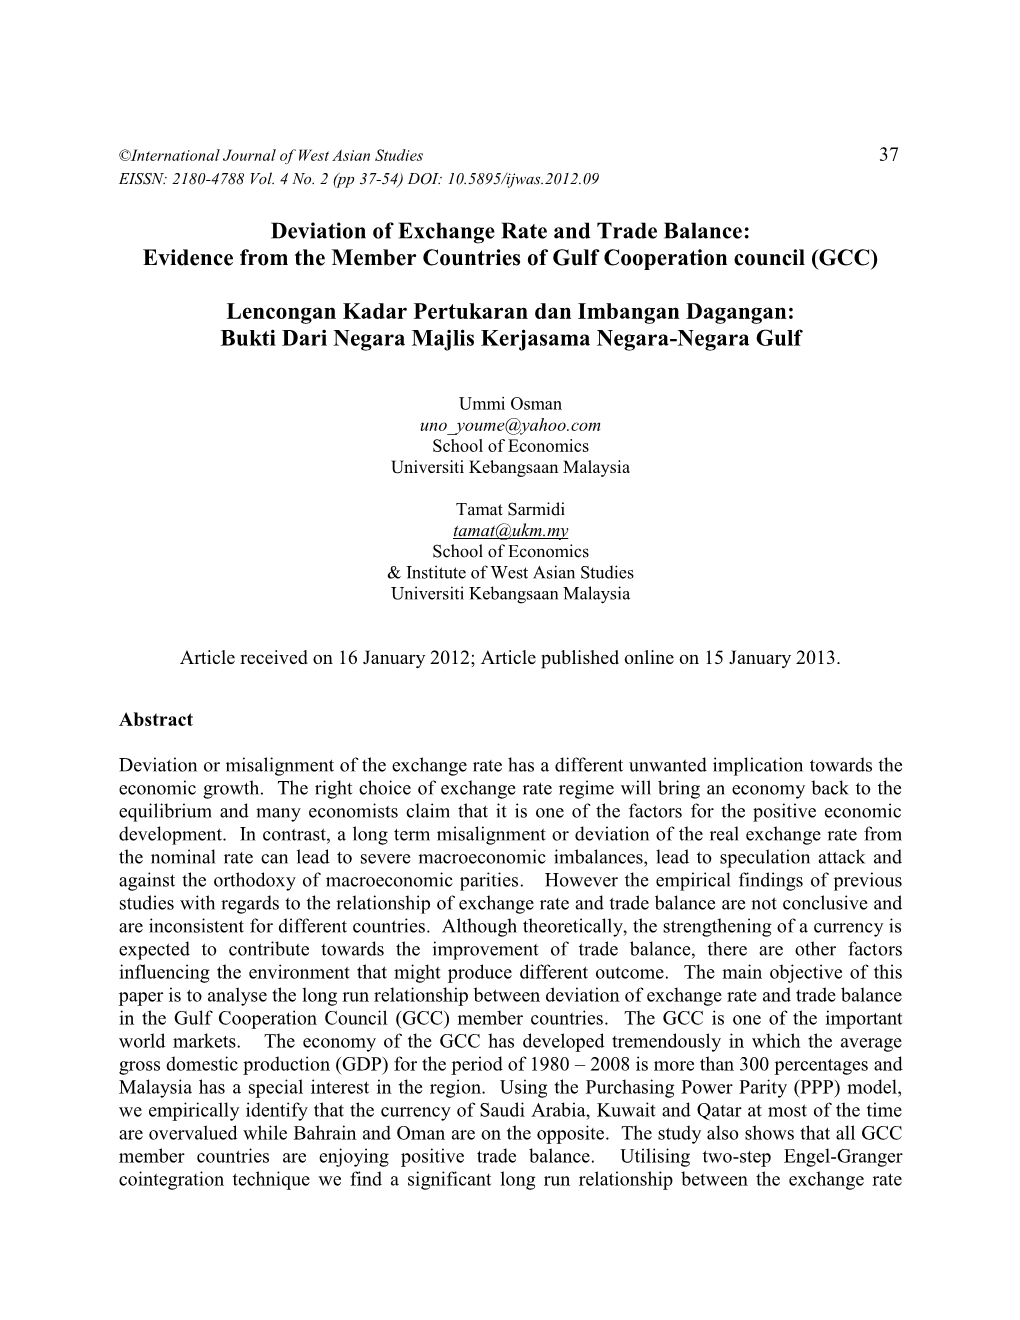 Deviation of Exchange Rate and Trade Balance: Evidence from the Member Countries of Gulf Cooperation Council (GCC)